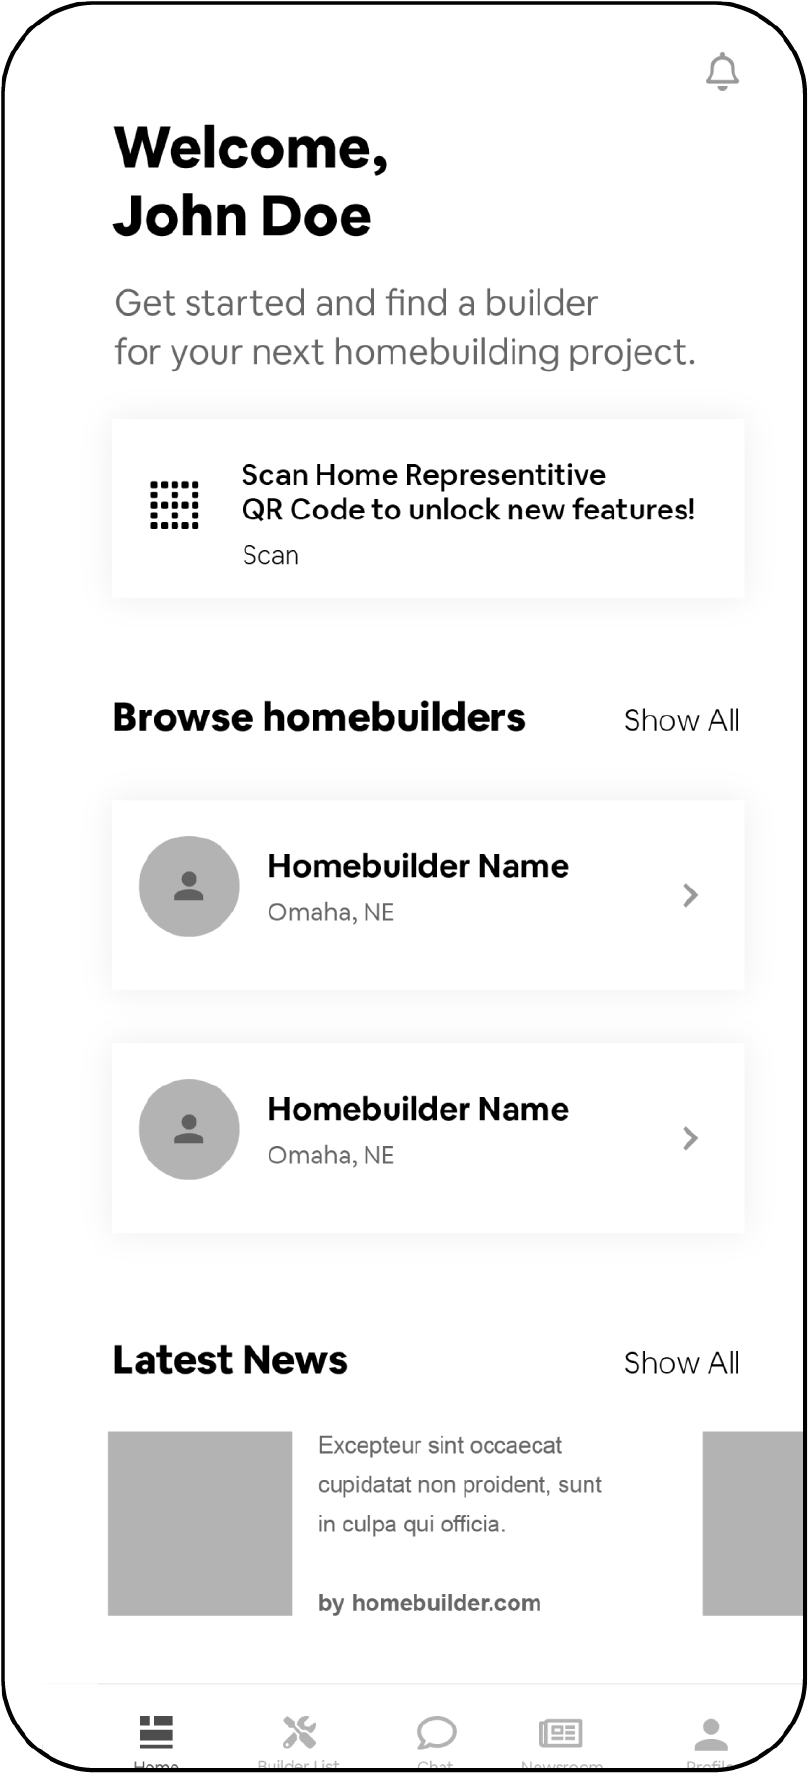 A black and white wireframe of the Builtzer mobile app. This wireframe shows the home screen of Builtzer. It welcomes the user, allows the user to browse homebuilders, and shows the latest news.